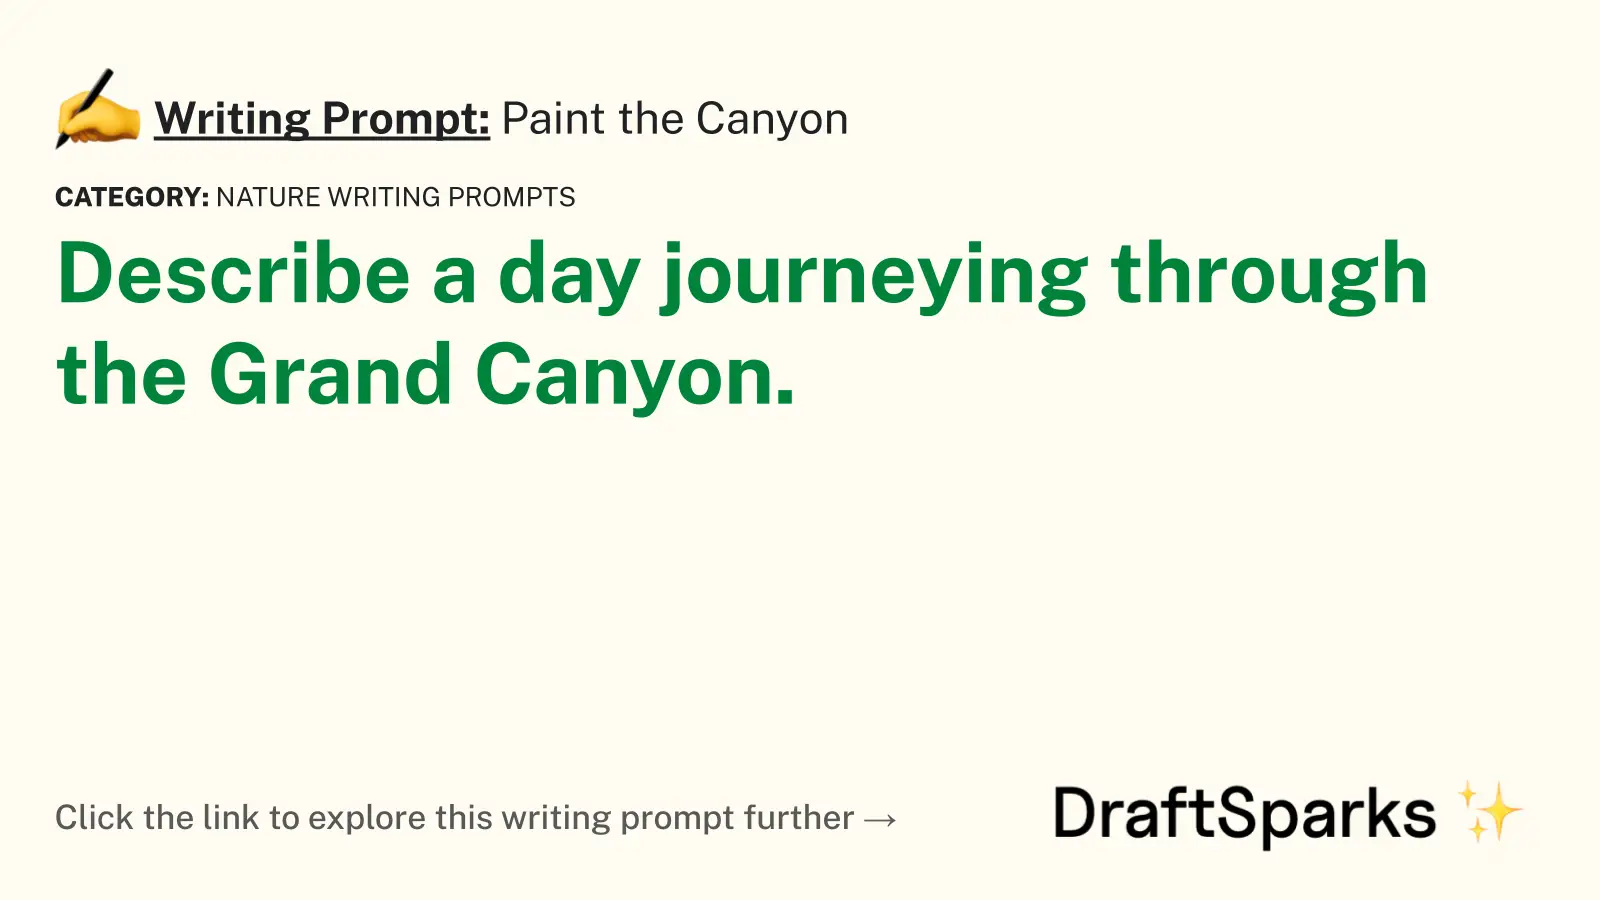 Paint the Canyon